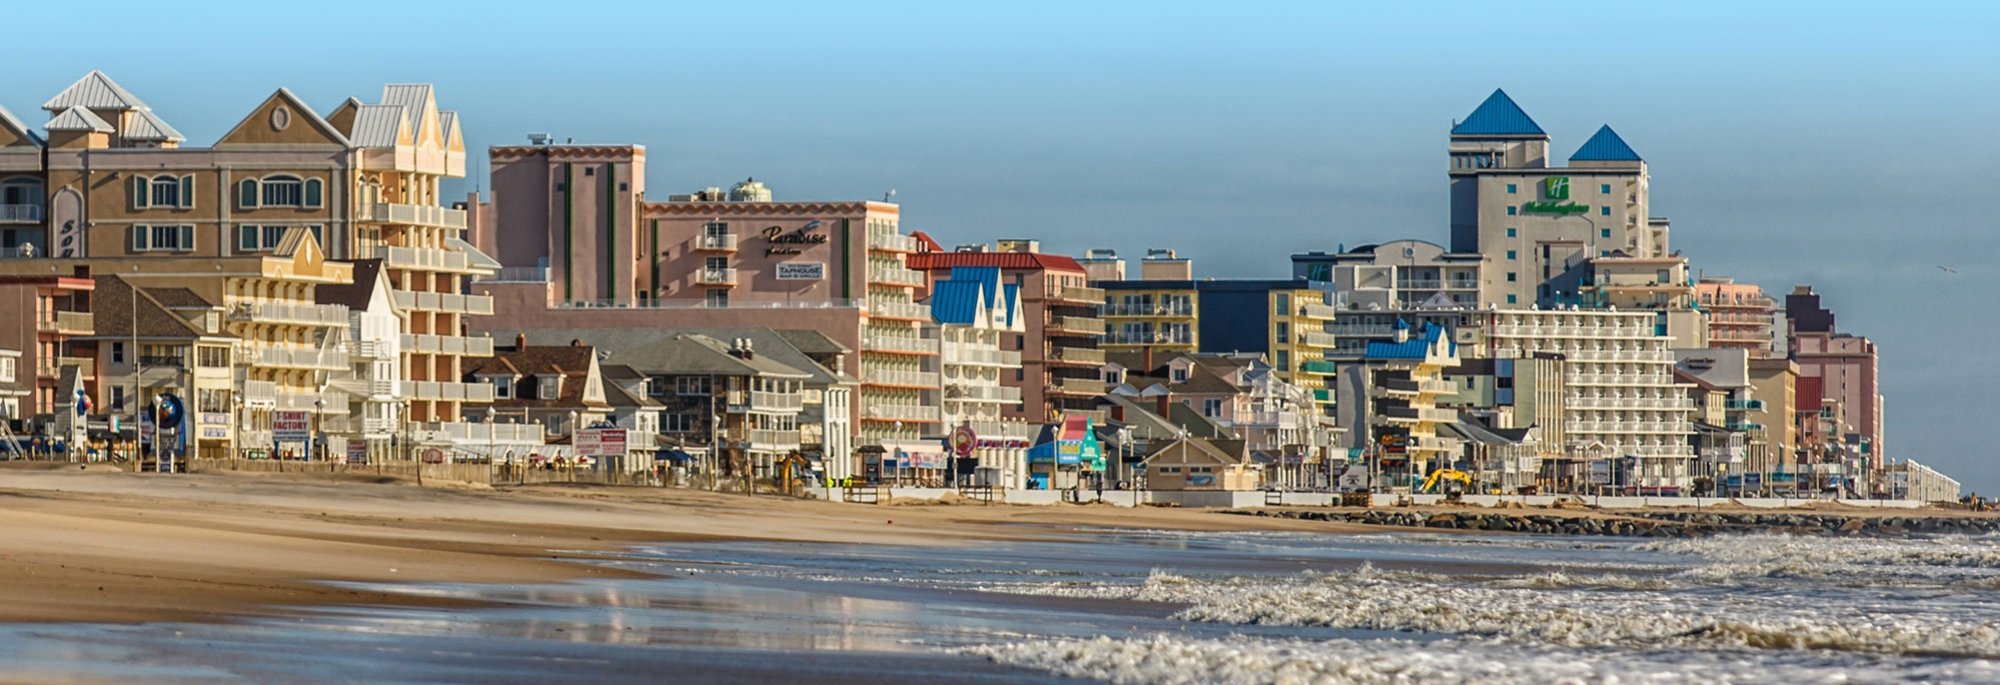 view from shoreline of ocean city boardwalk and hotels